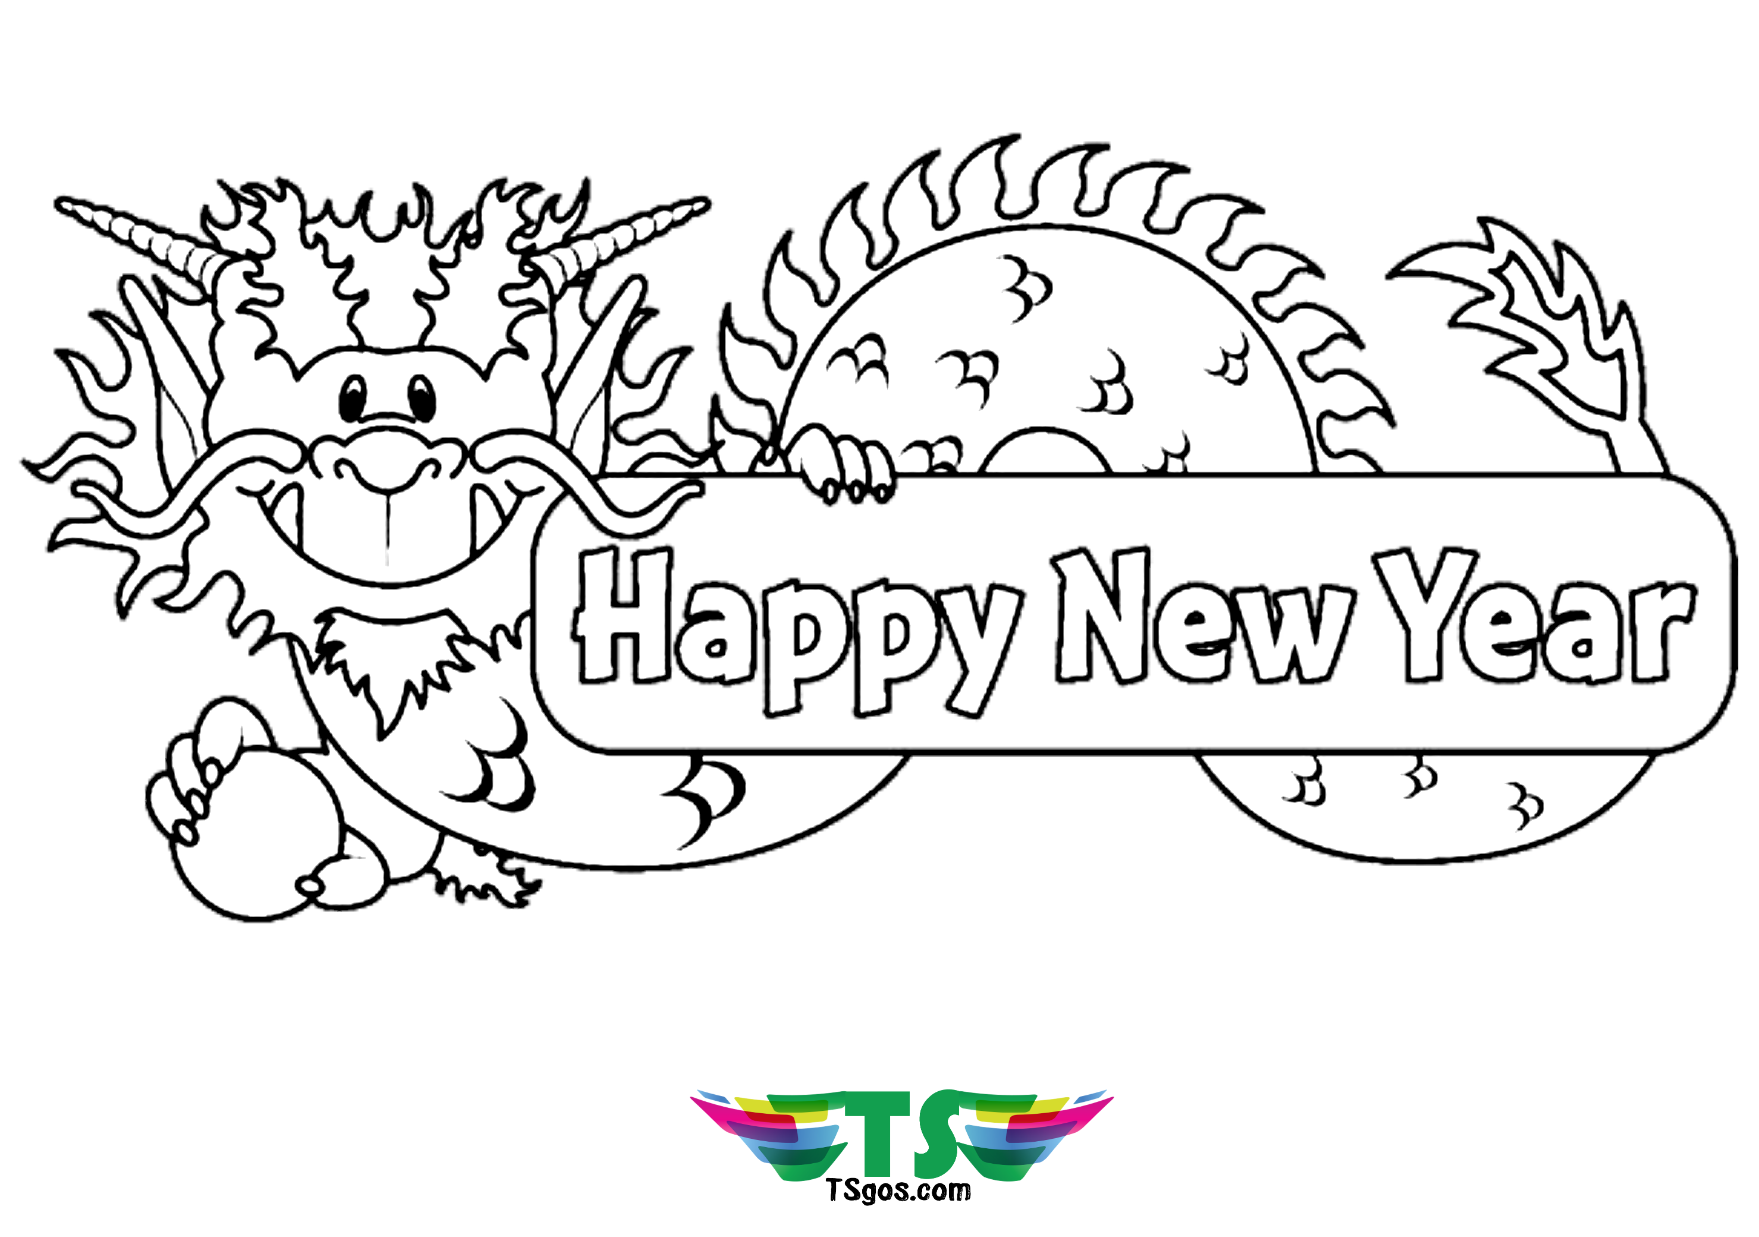 Chinese new year coloring pages for kindergarten   TSgos.com